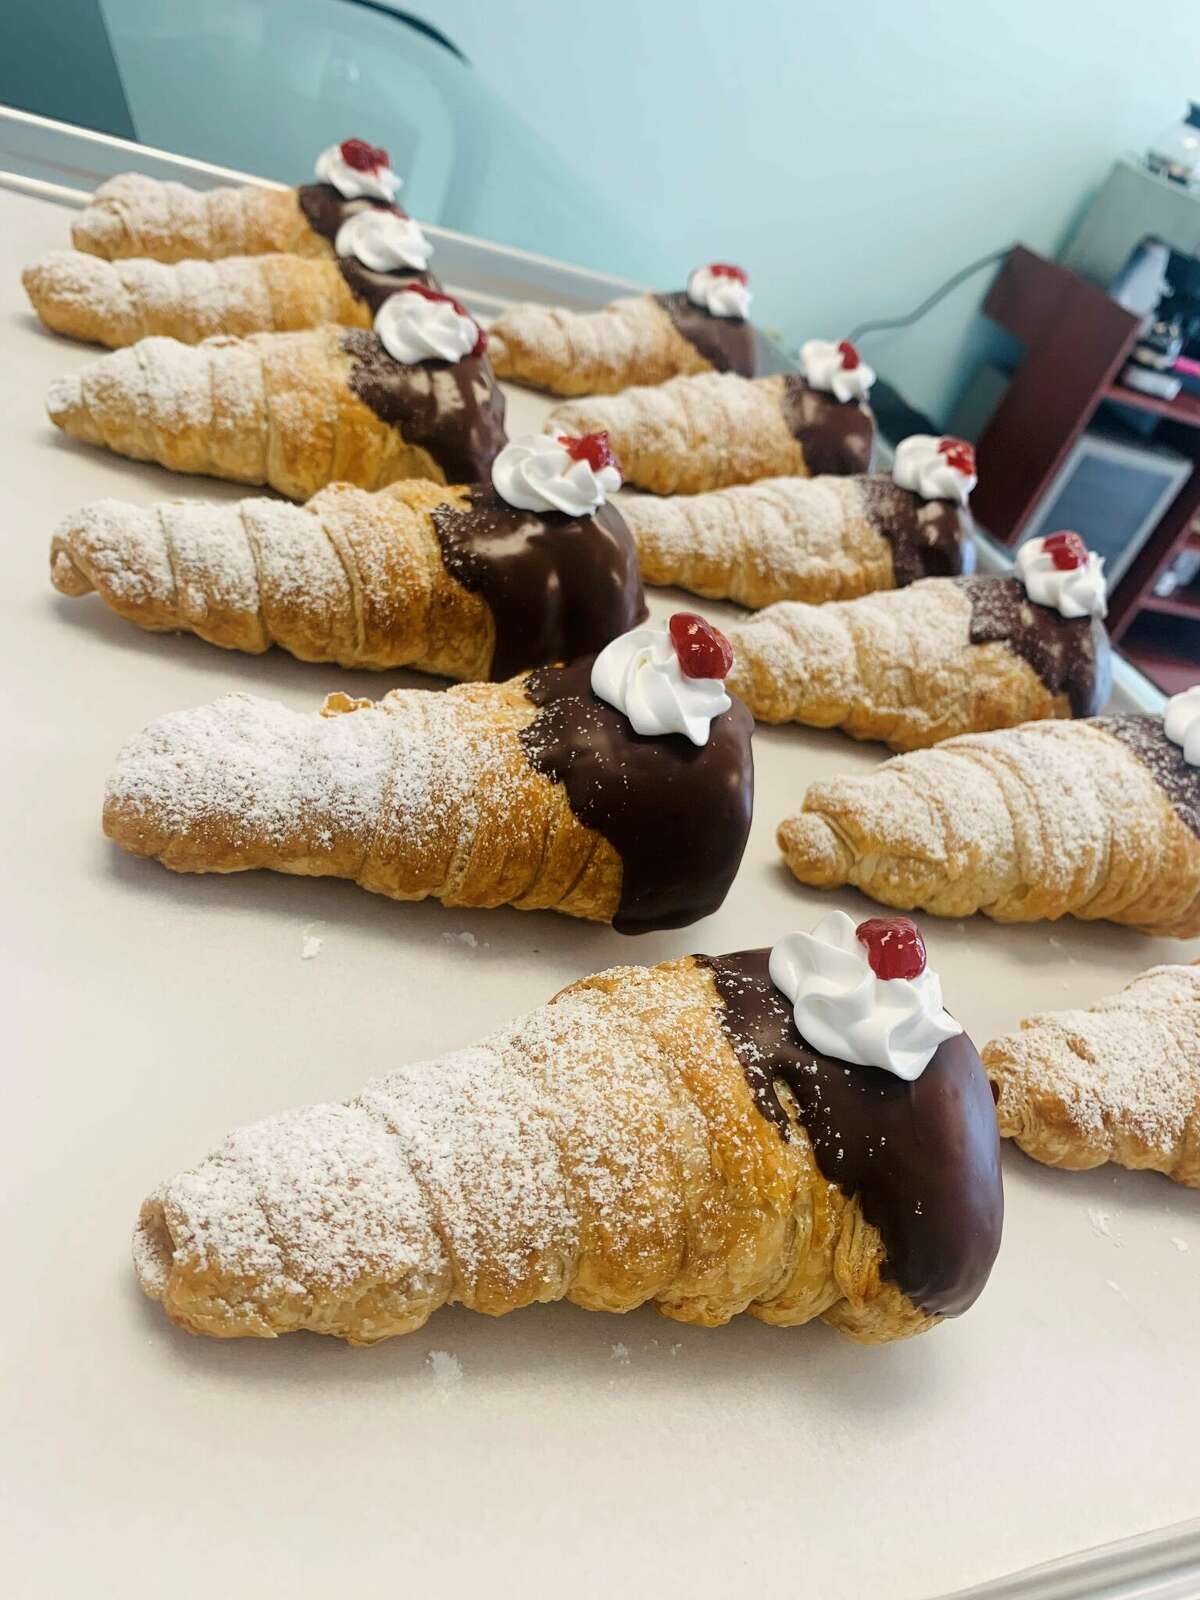 Among the delicacies available for purchase at El Cisne Bakery in New Milford, customers can satisfy their sweet tooth with the bakery's array of cookies, cakes, croissants and other tasty treats.